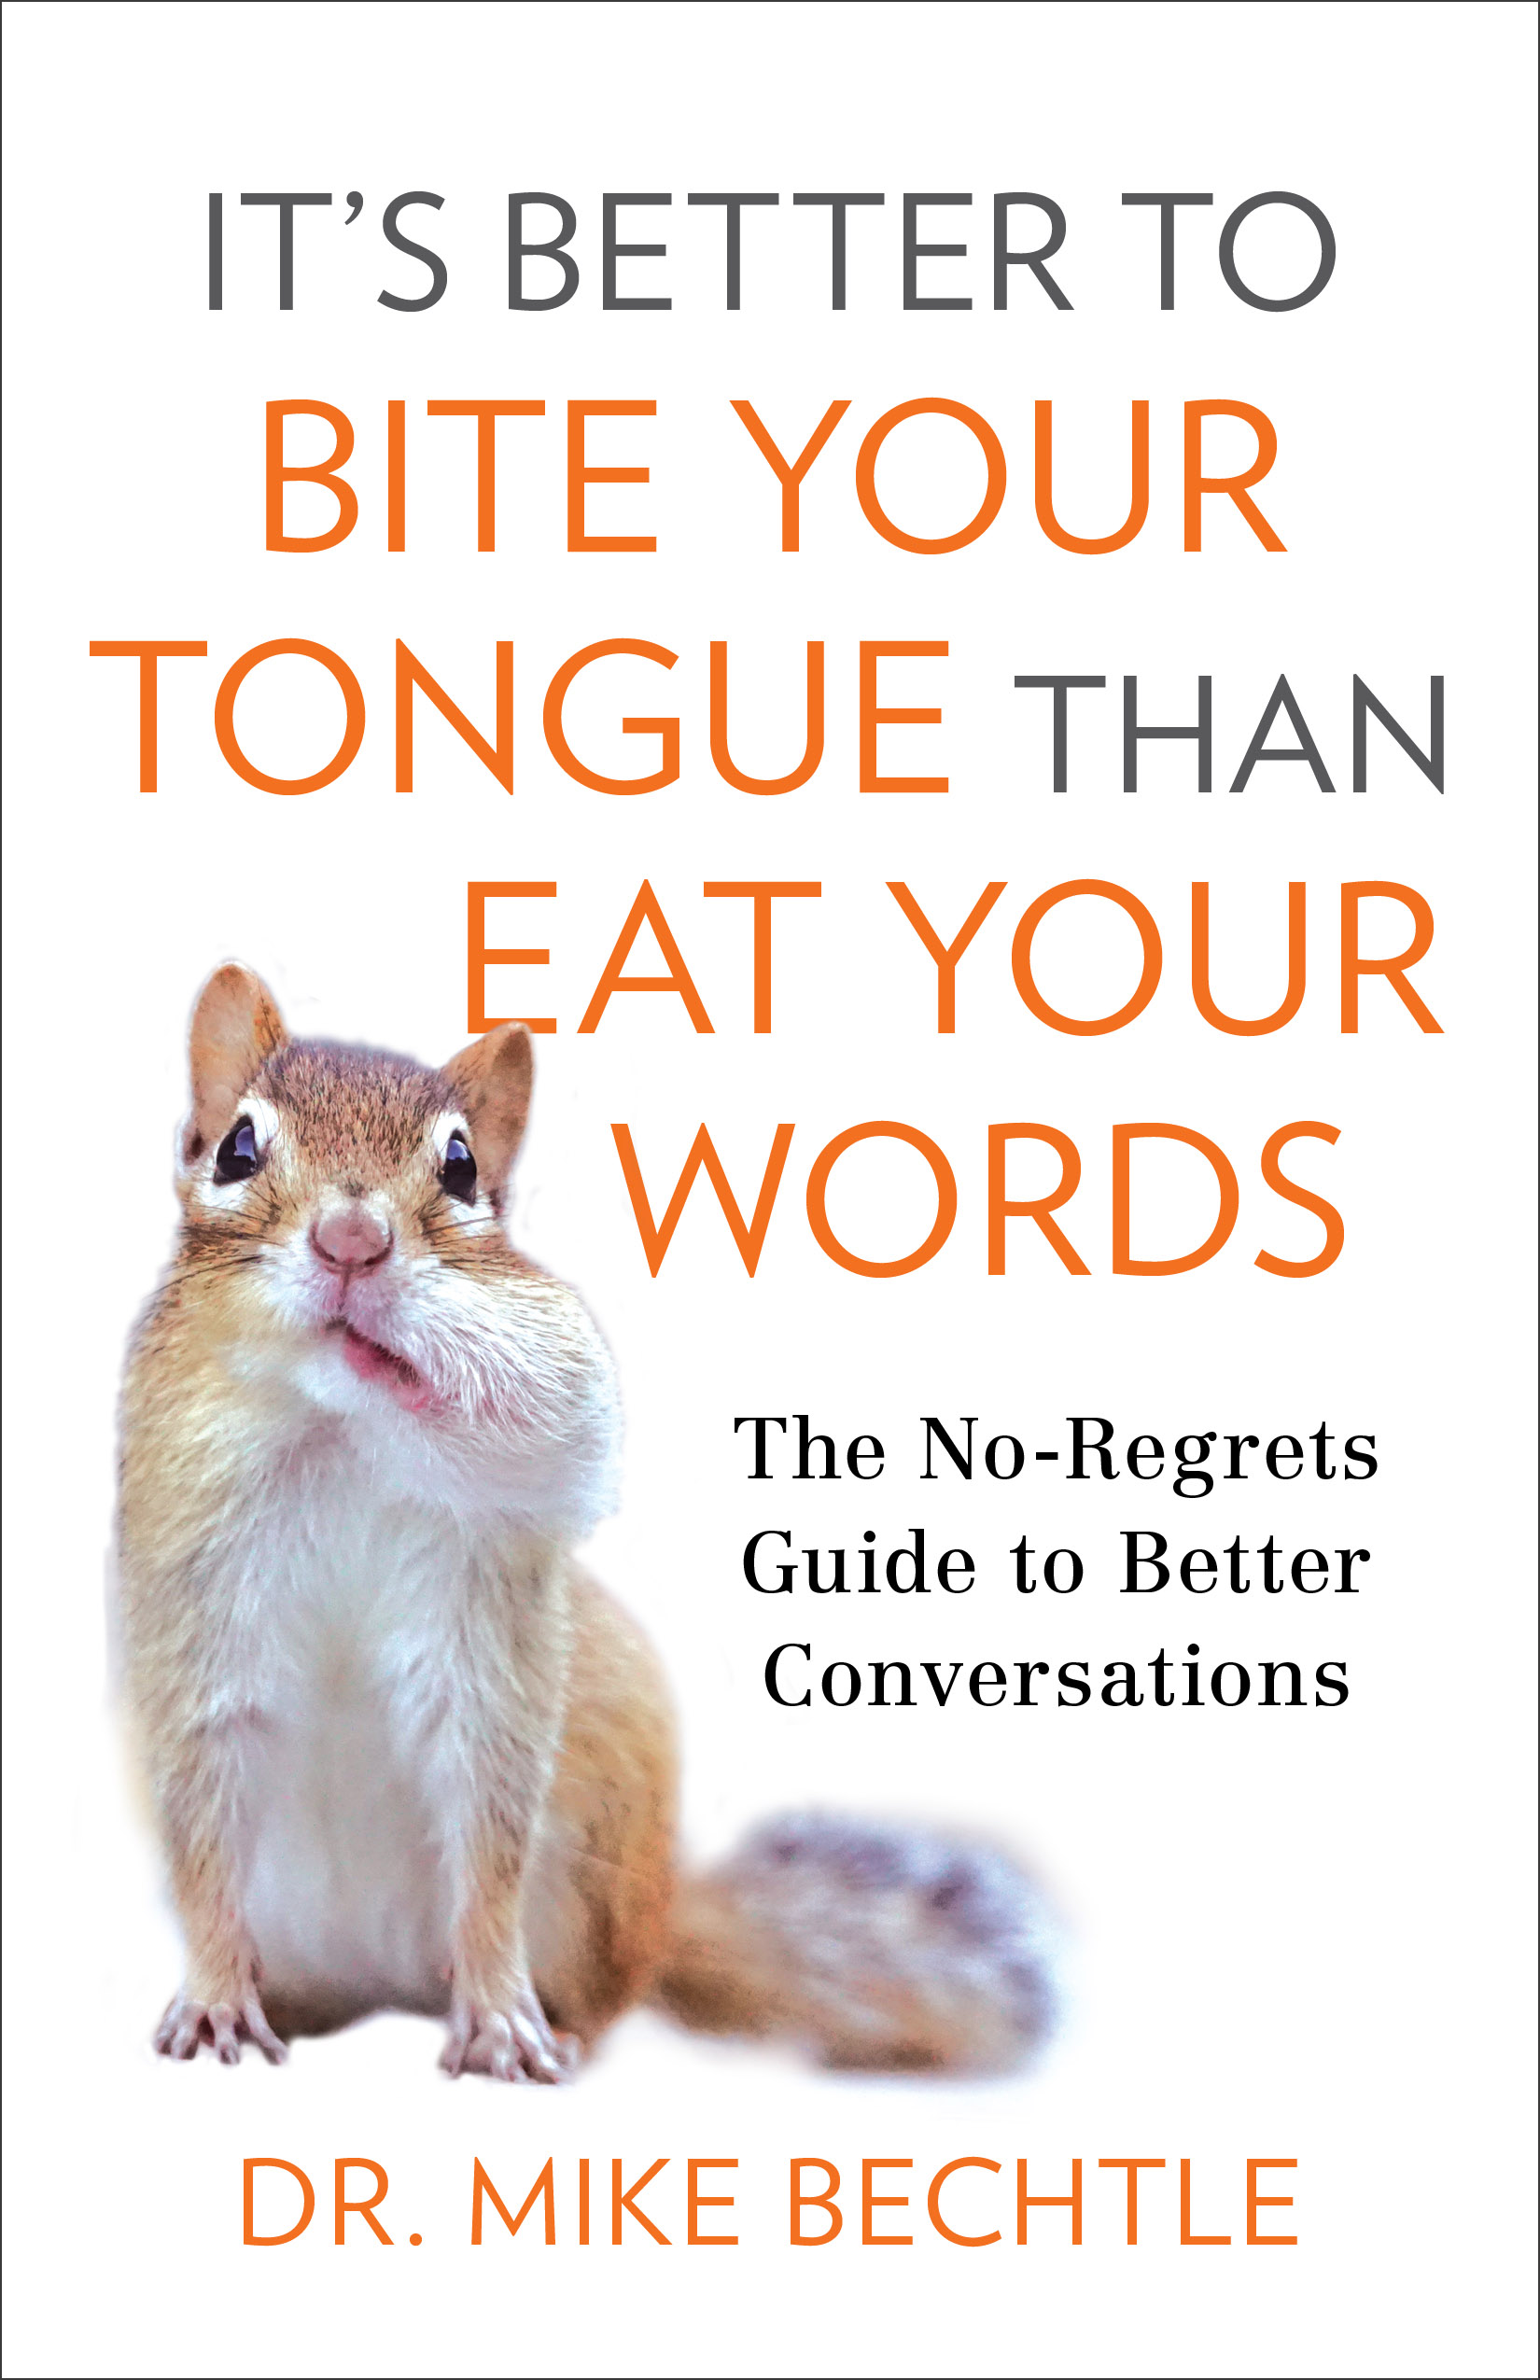 It’s Better to Bite Your Tongue than to Eat Your Words